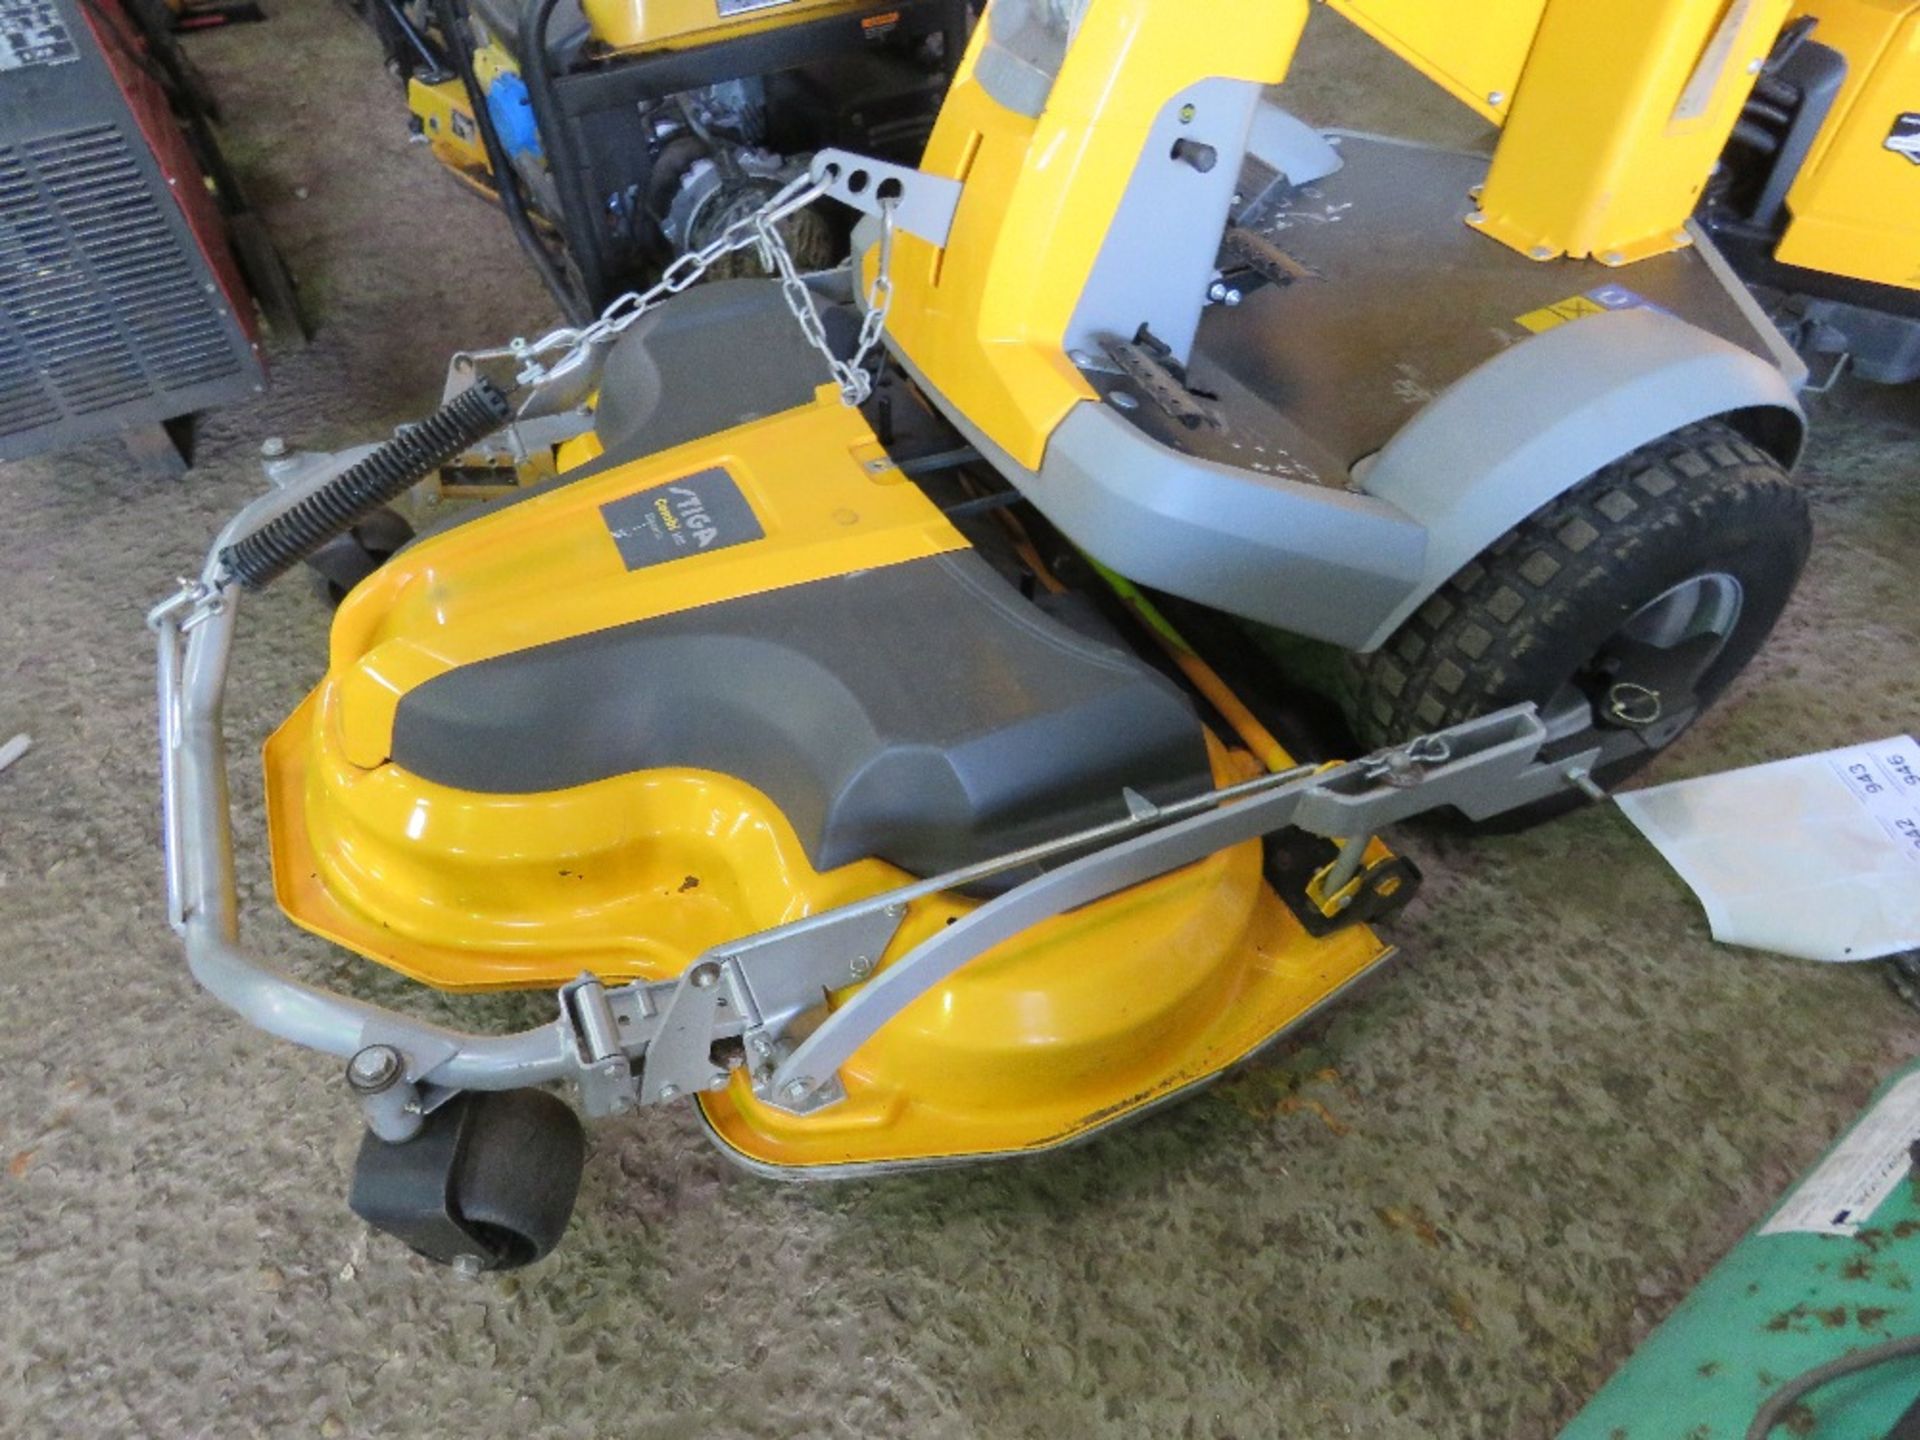 STIGA PARK 520P RIDE ON MOWER WITH COMBI 100 DECK. 273 REC HRS, YEAR 2015. WHEN TESTED WAS SEEN TO D - Image 4 of 11